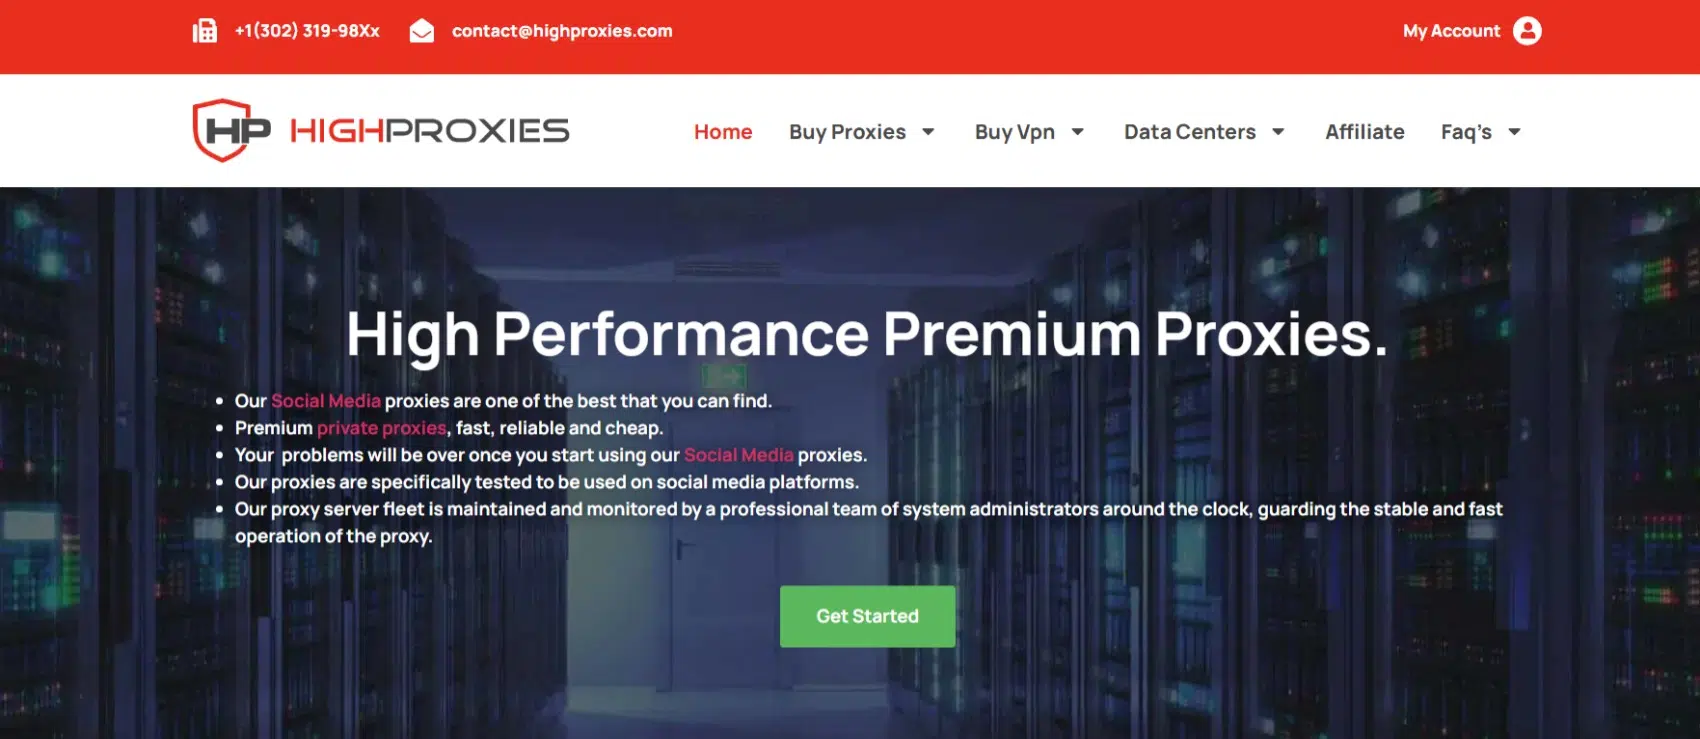 Best Proxy Affiliate Programs To Promote- High Proxies